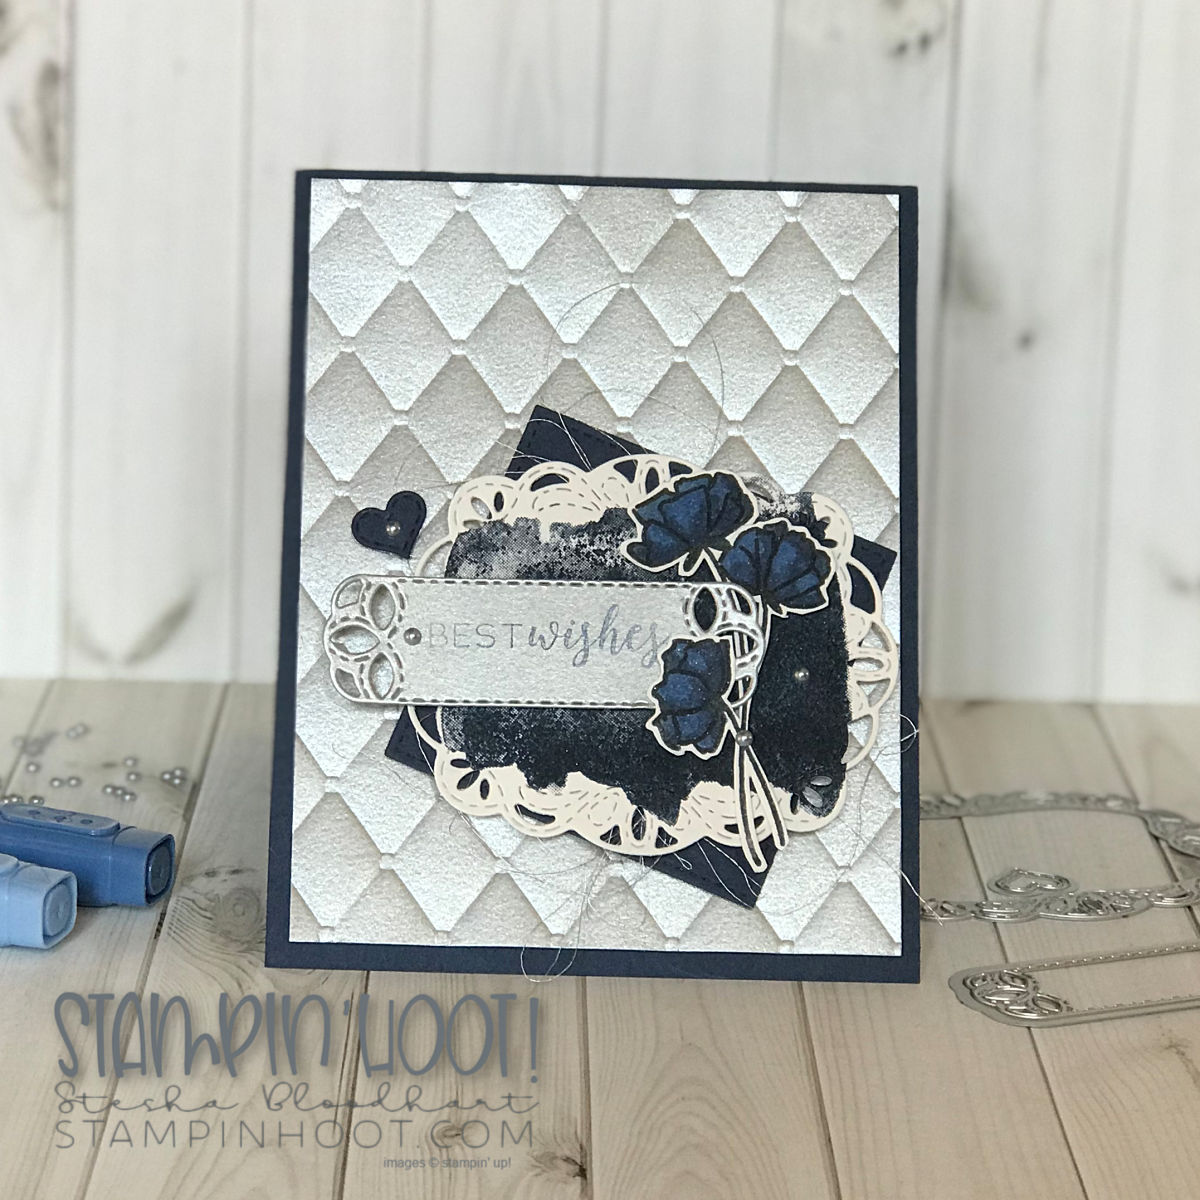 Stitched All Around Bundle by Stampin' Up! Best Wishes Wedding Card by Stesha Bloodhart Stampin' Hoot! for #GDP156 Case the Designer